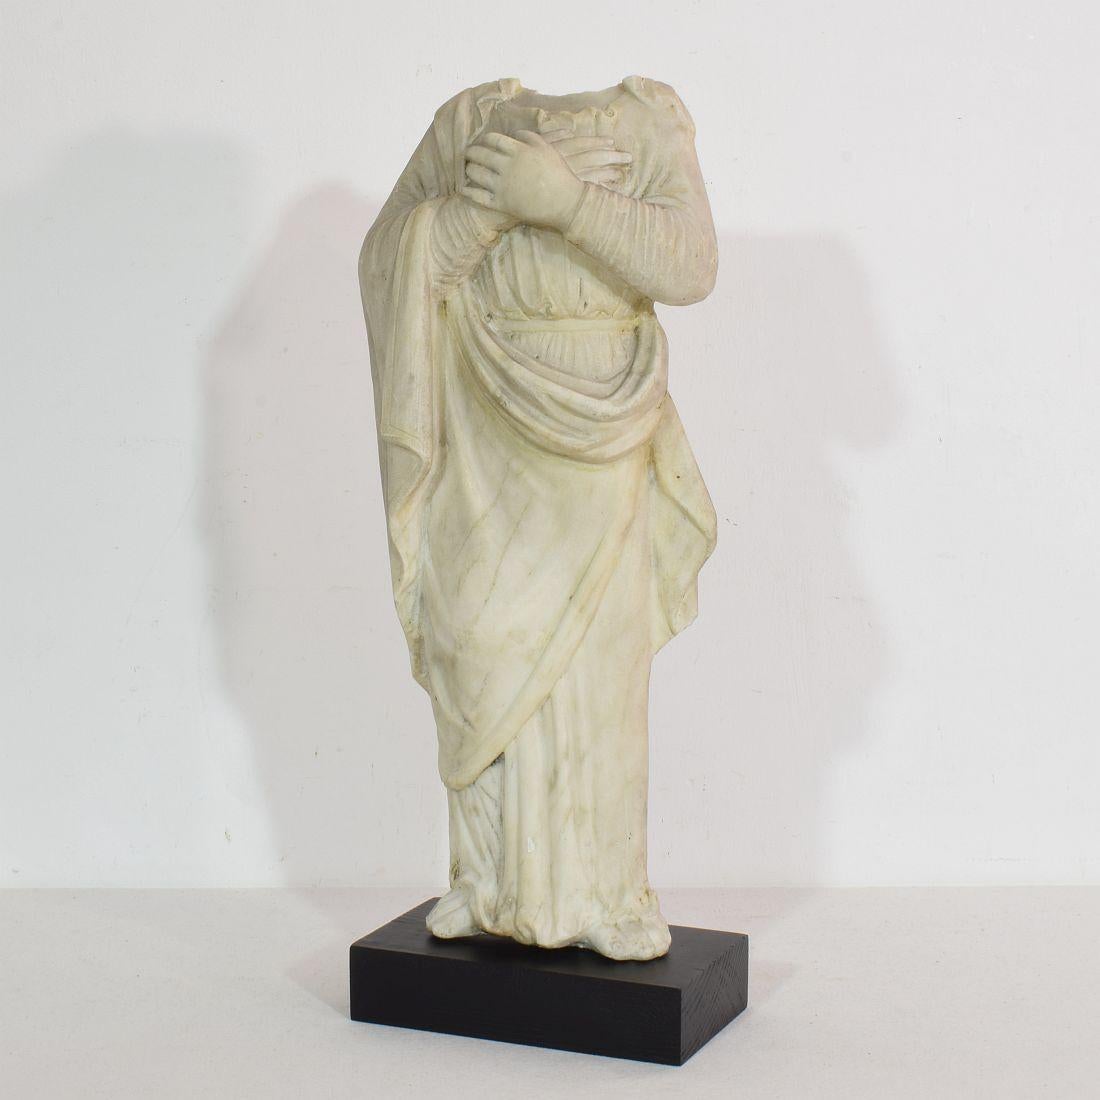 Beautiful fragment of a marble statue of a Madonna.
Great weathered patina.
France, circa 1750.
Weathered and missing the head.
Measurements include the wooden base.